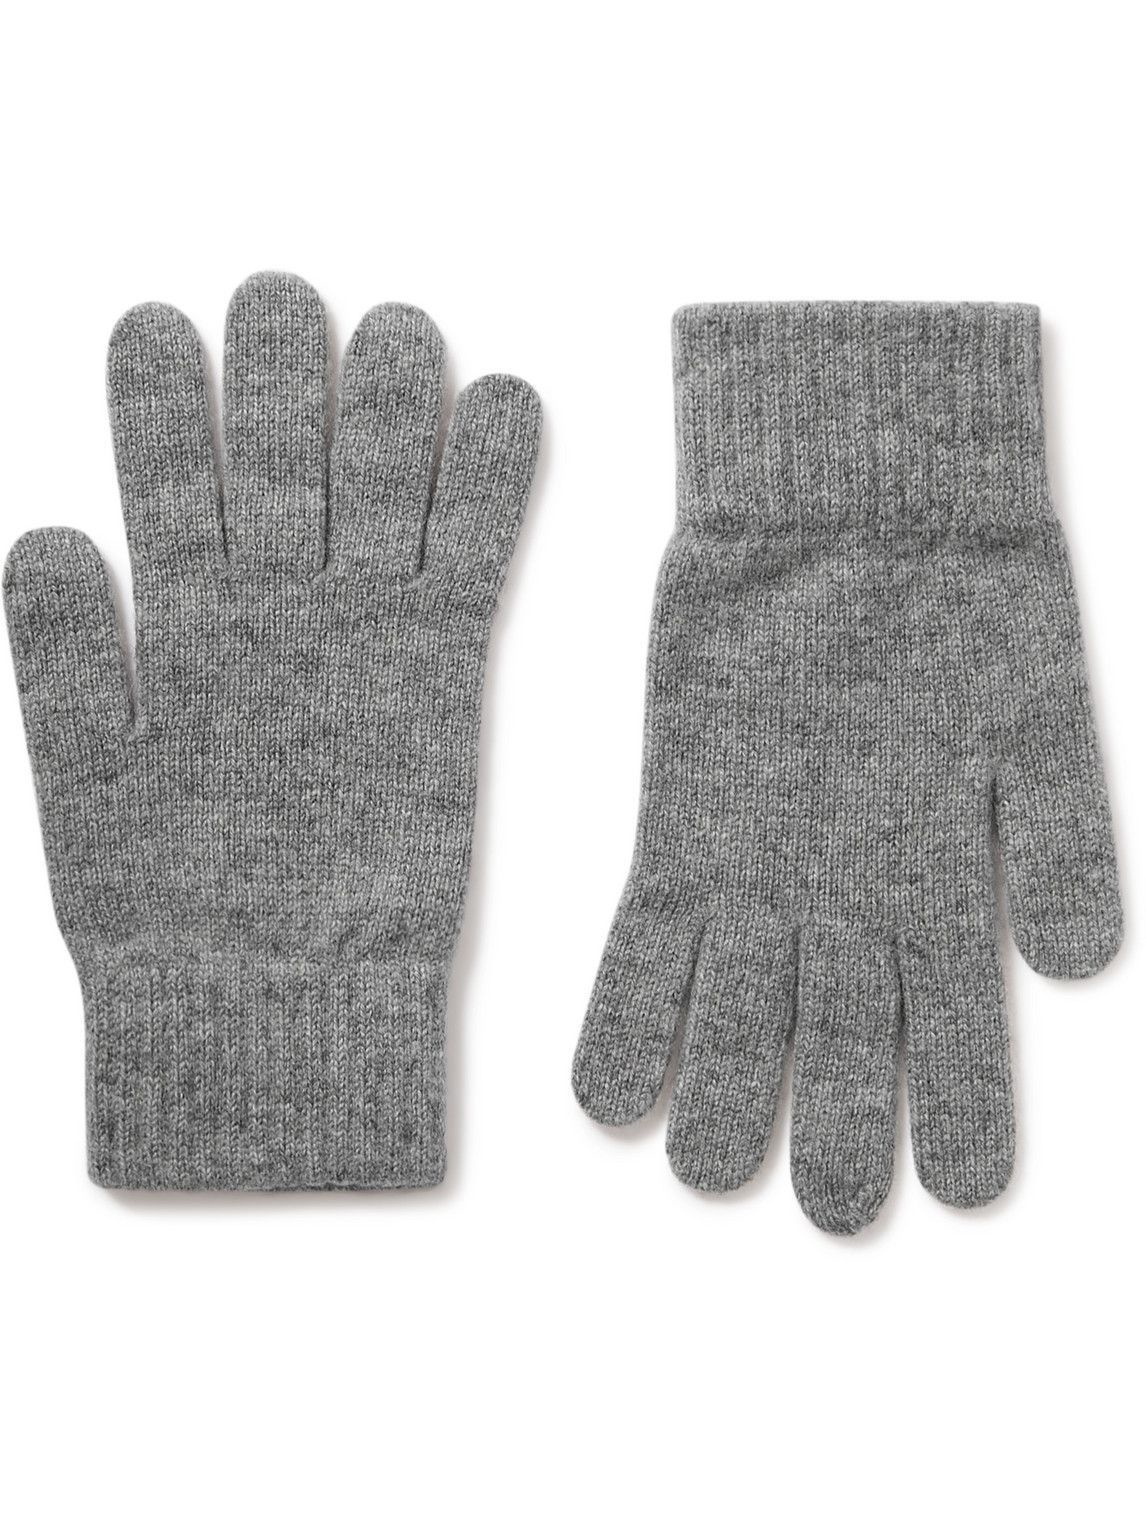 Anderson & Sheppard - Cashmere Gloves Anderson & Sheppard